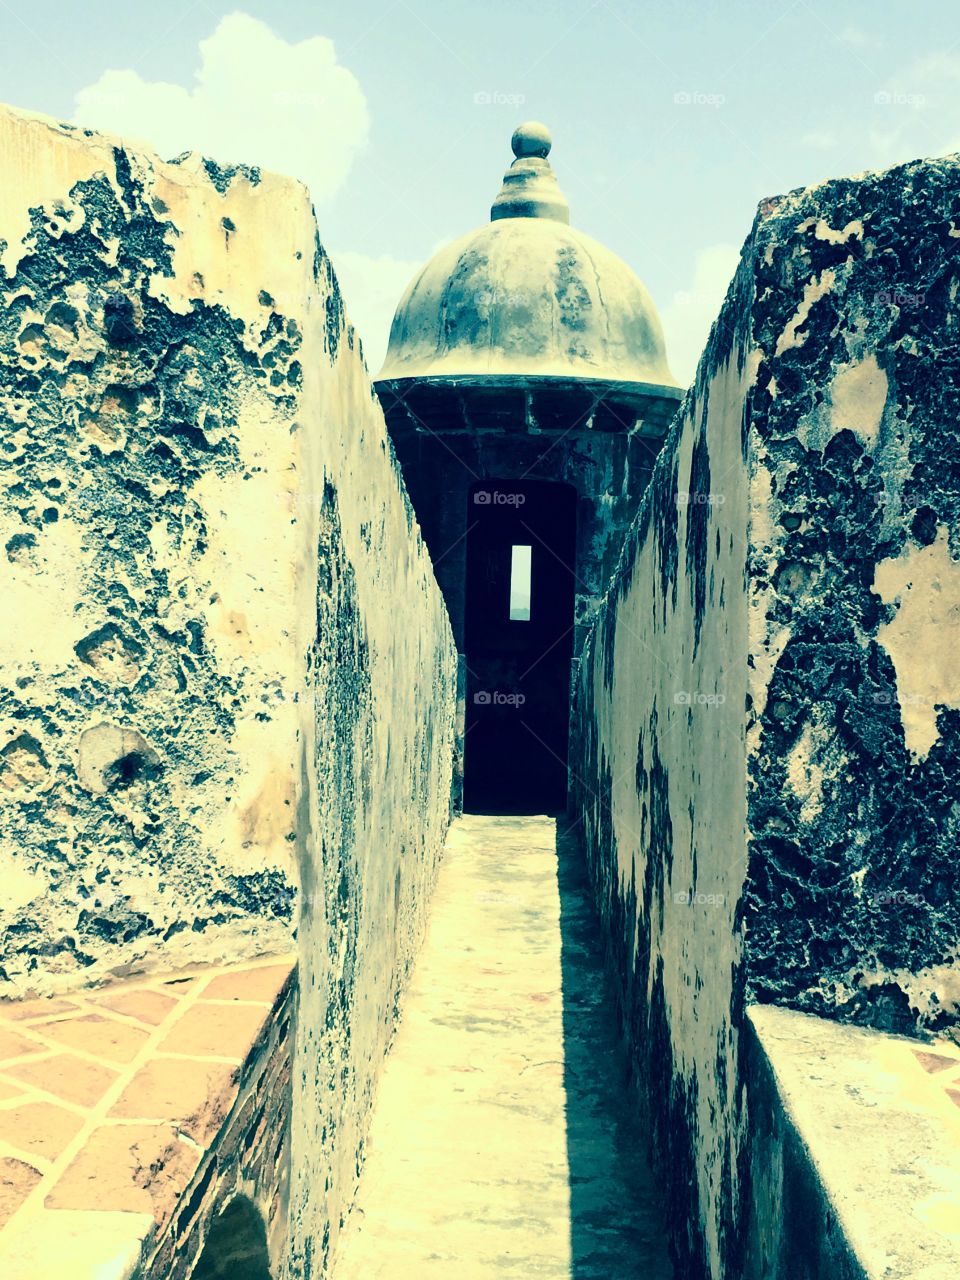 Guard on Duty. Looking into one of the iconic watchtower turrets found on the walls of El Morro fort.